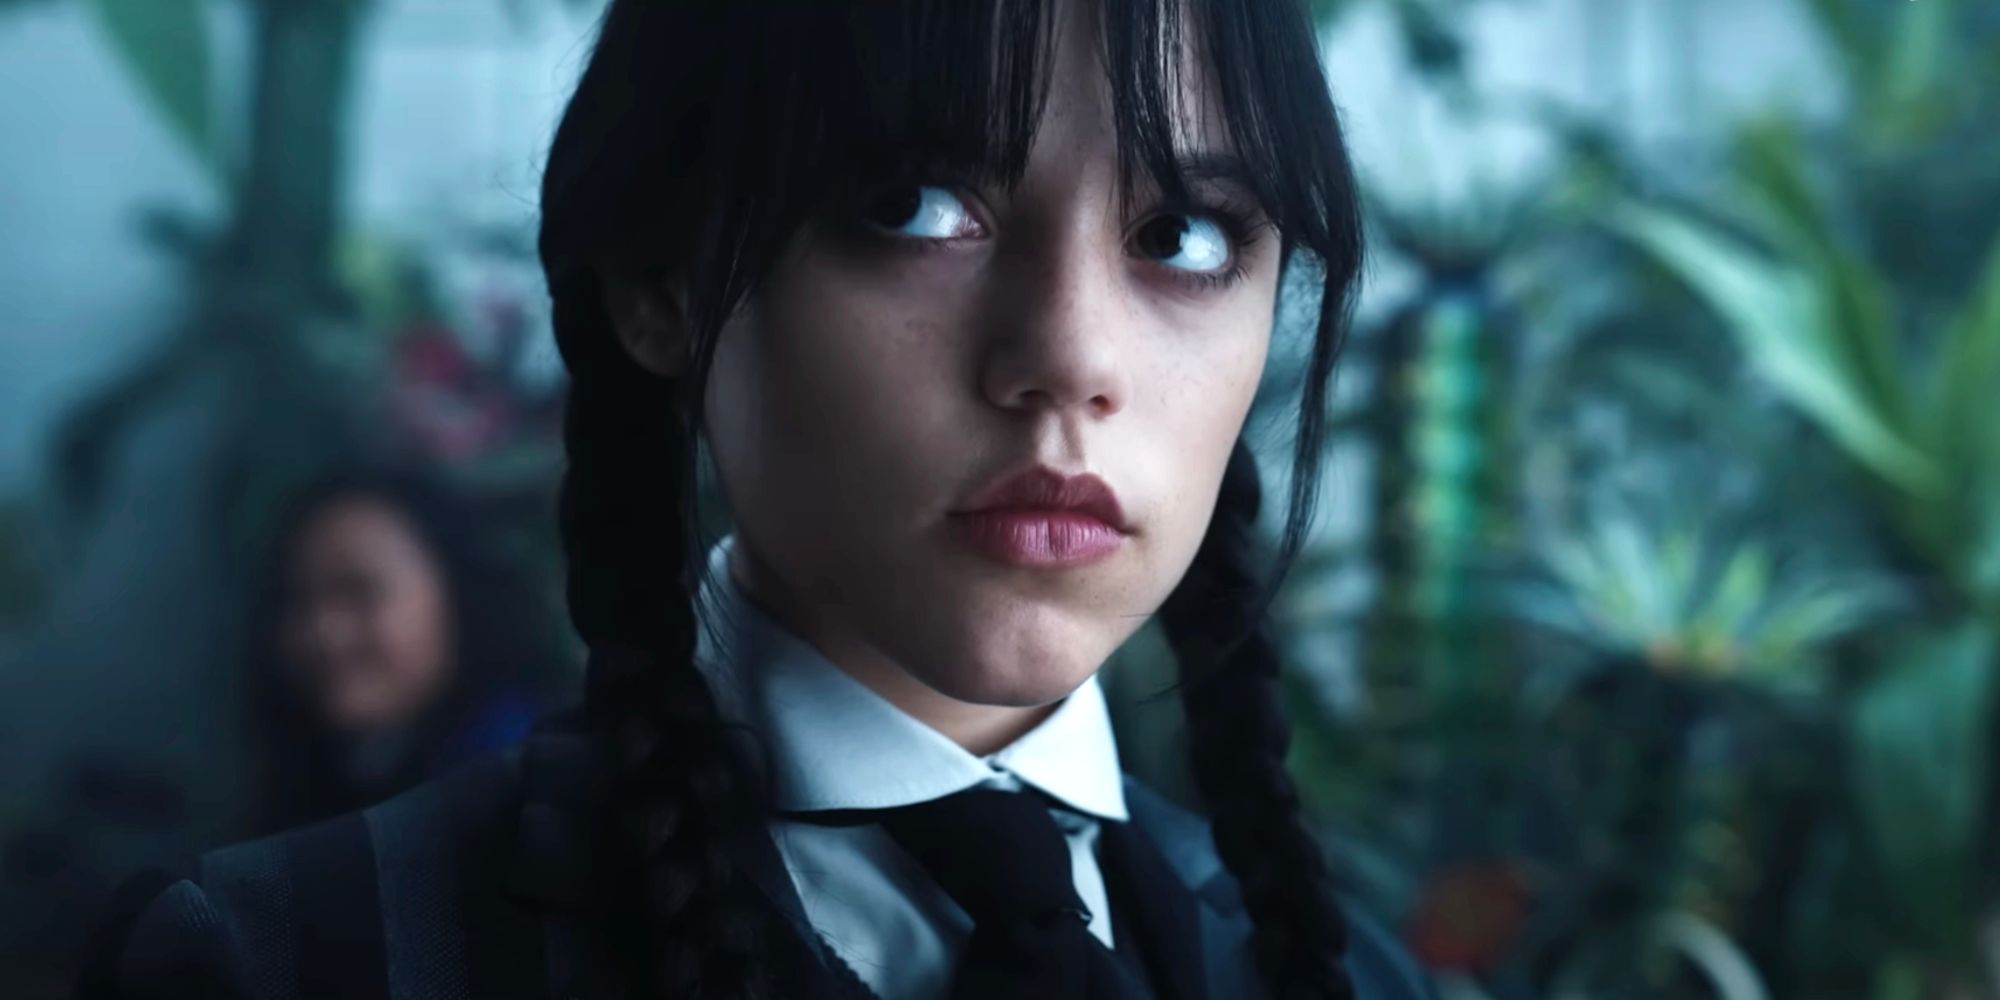 Jenna Ortega as Netflix's Wednesday Addams is 'perfect', fans rave